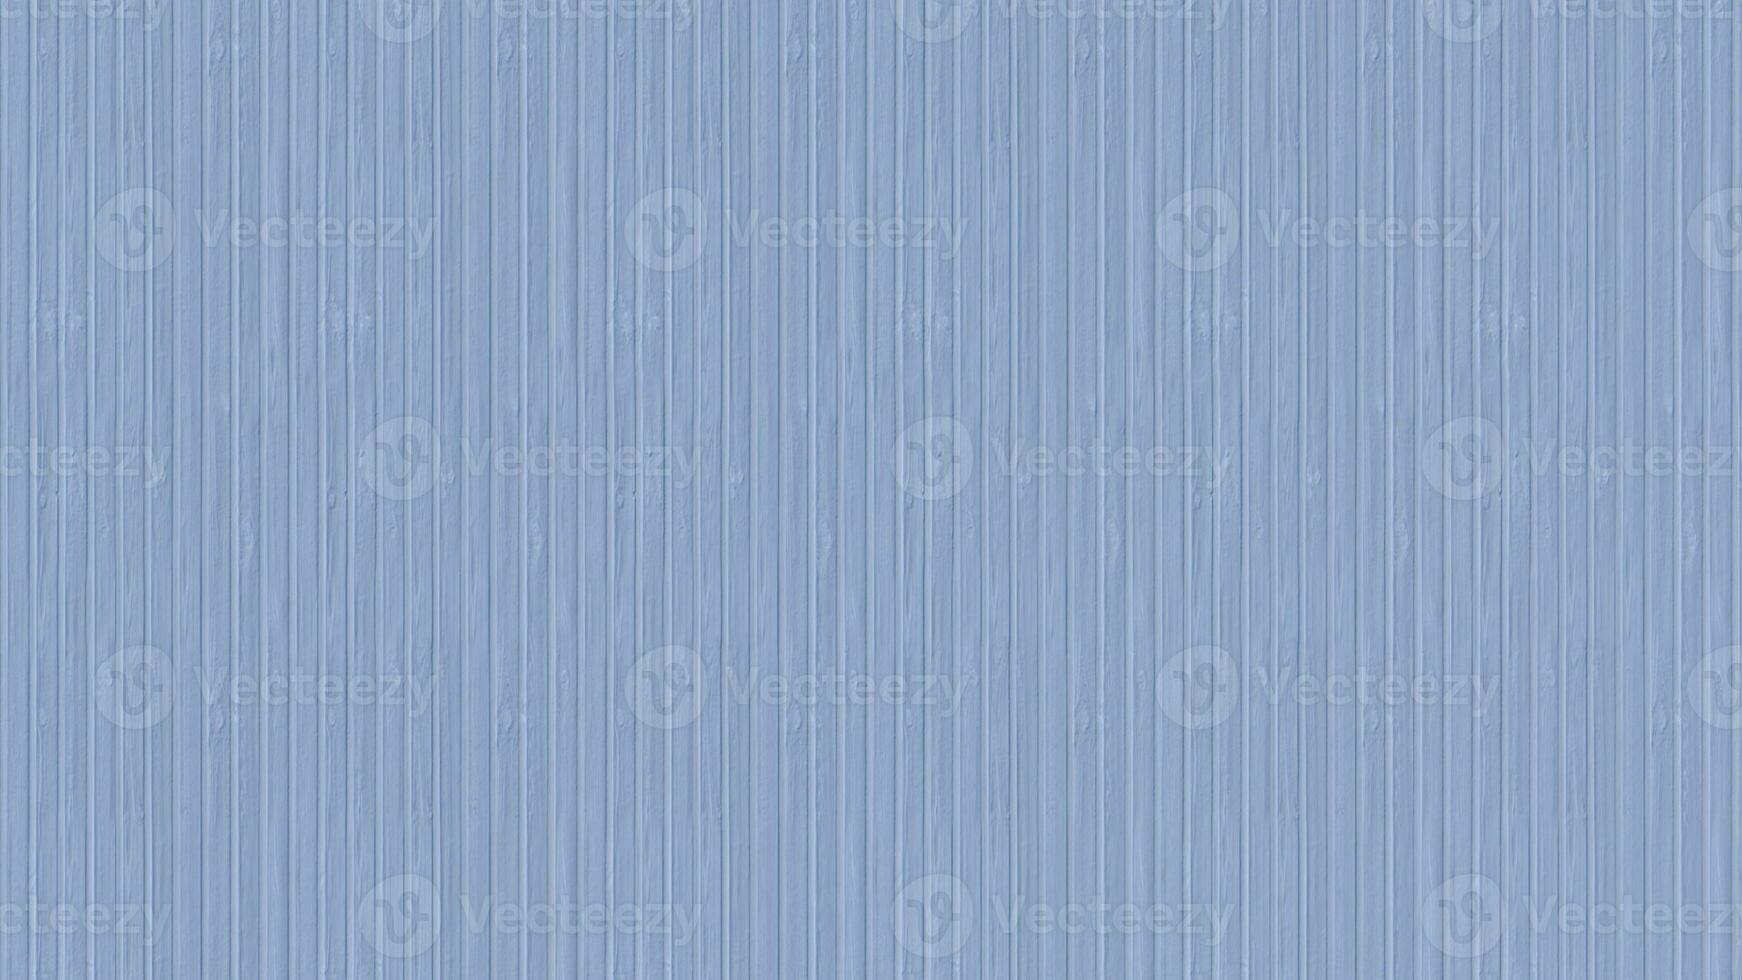 Wood texture brown for background or cover photo